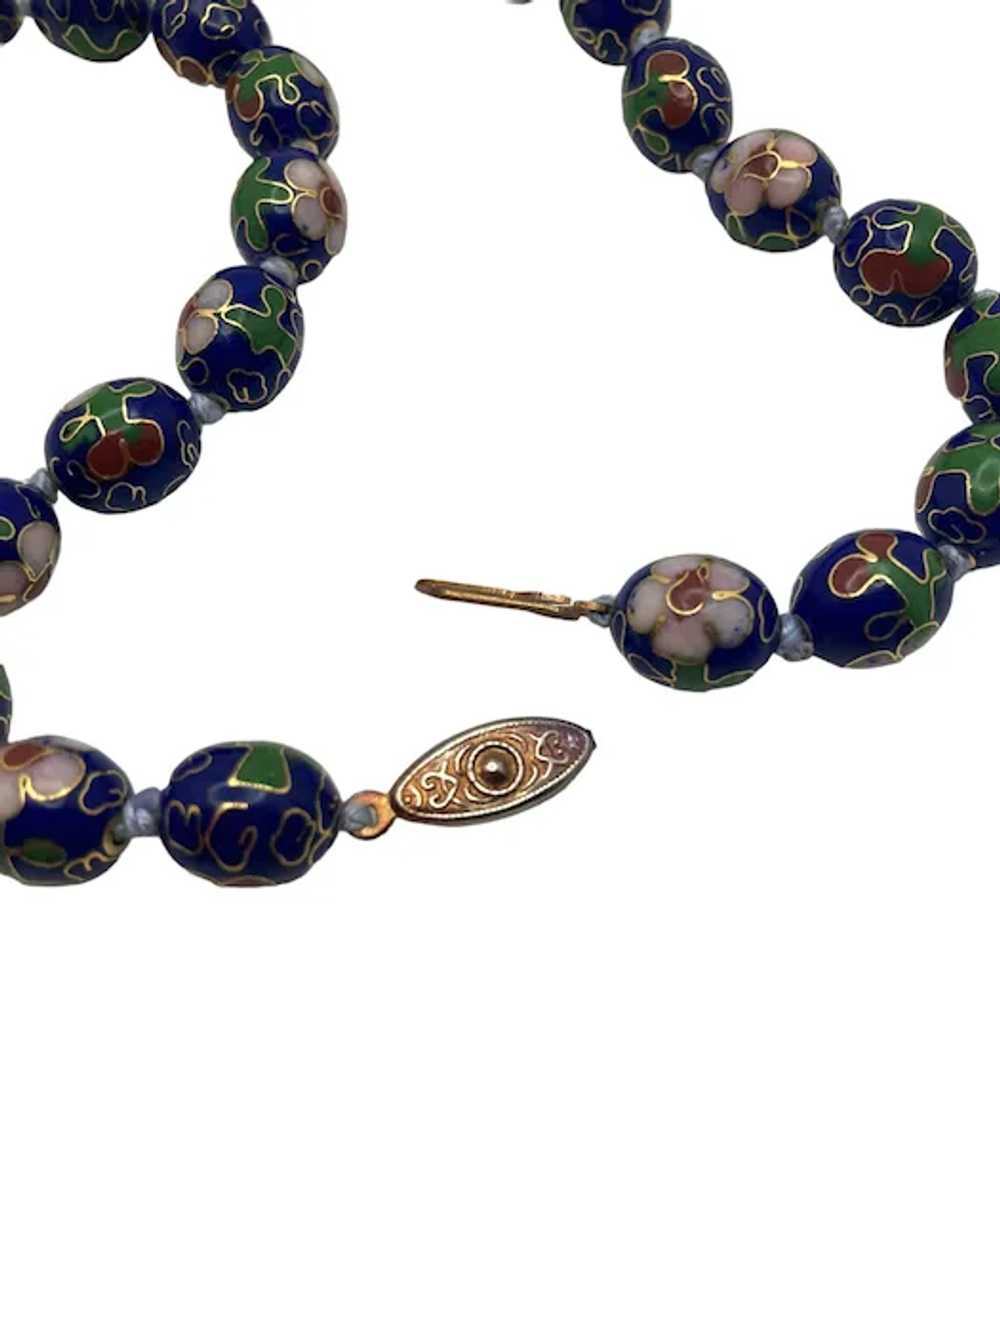 Vintage Chinese Cloisonne Oval Bead Necklace - image 9